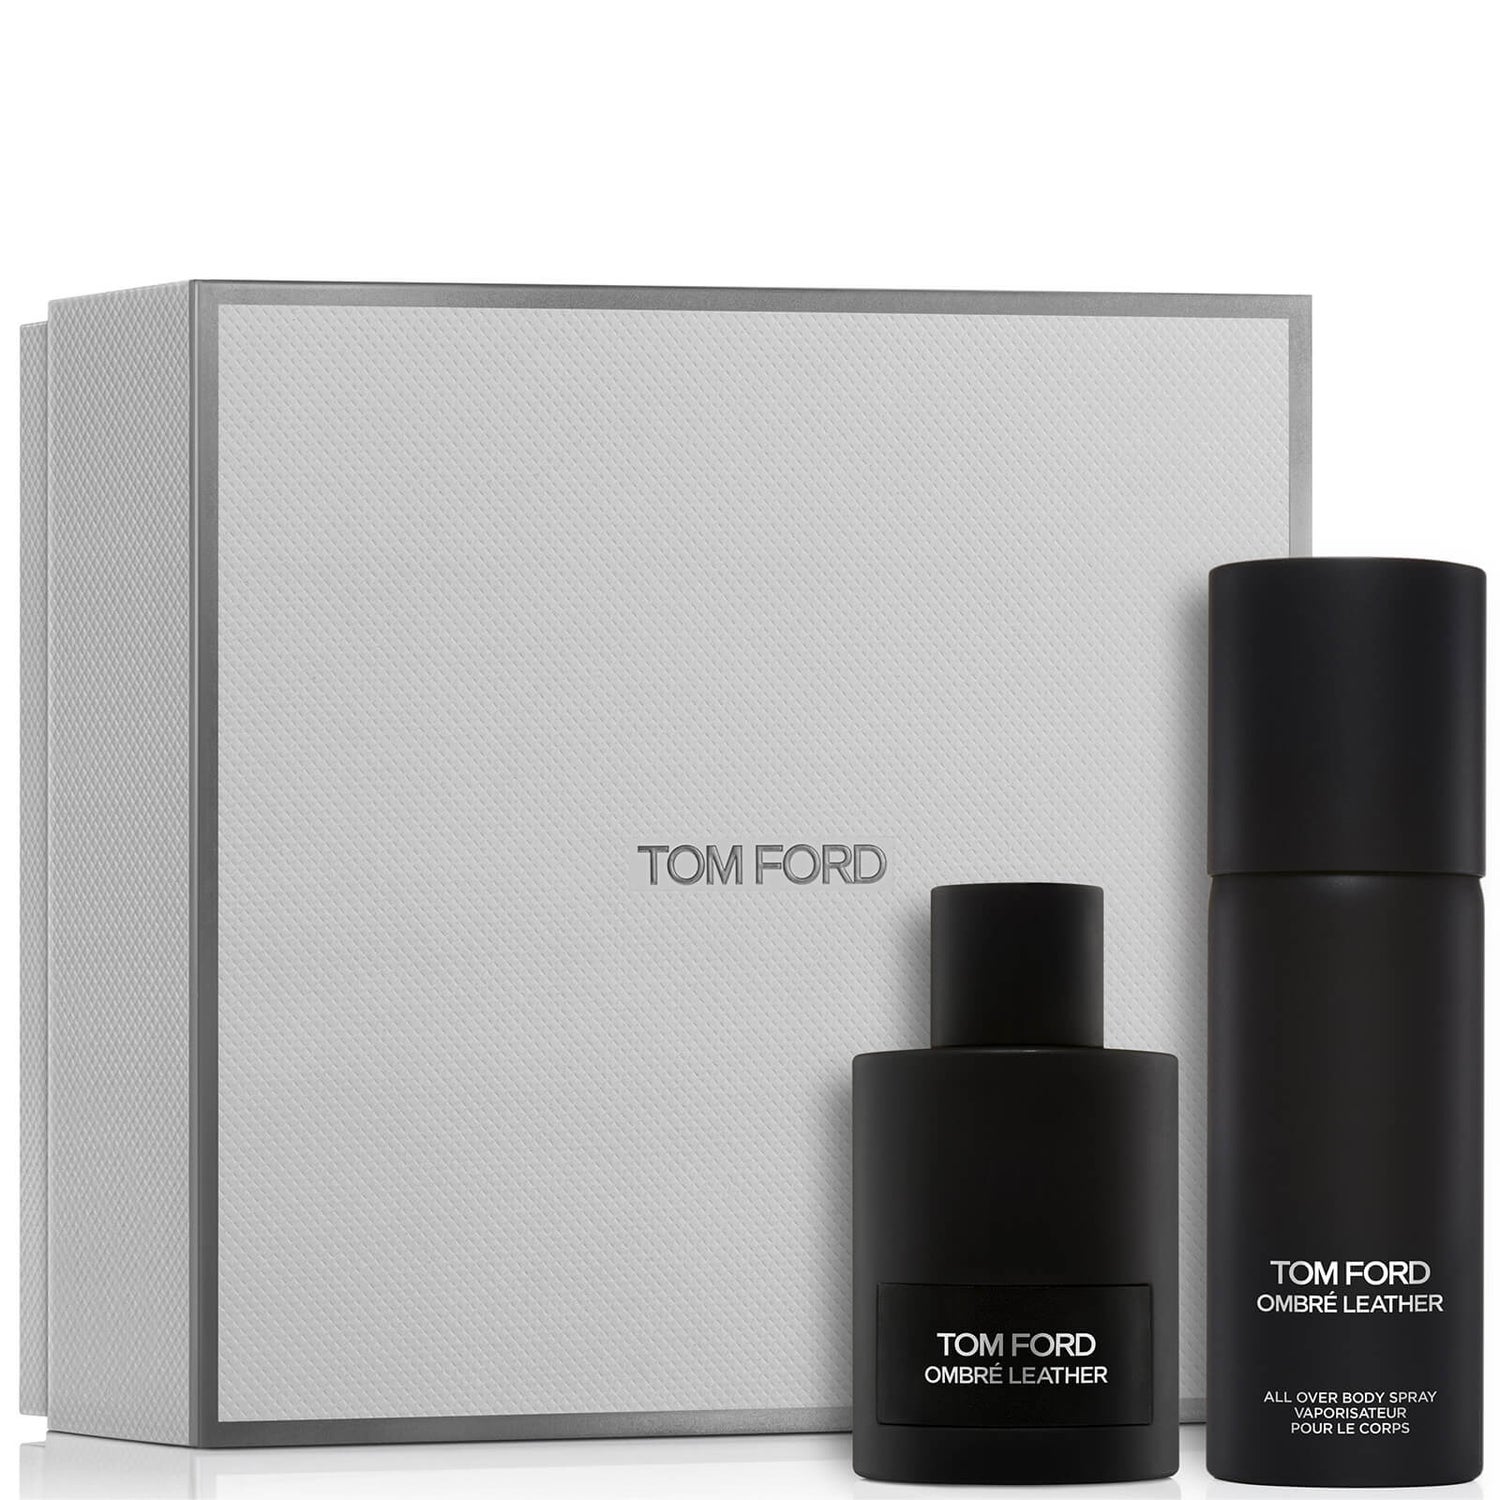 Tom Ford Ombre Leather 100ml & Aob Set - LOOKFANTASTIC